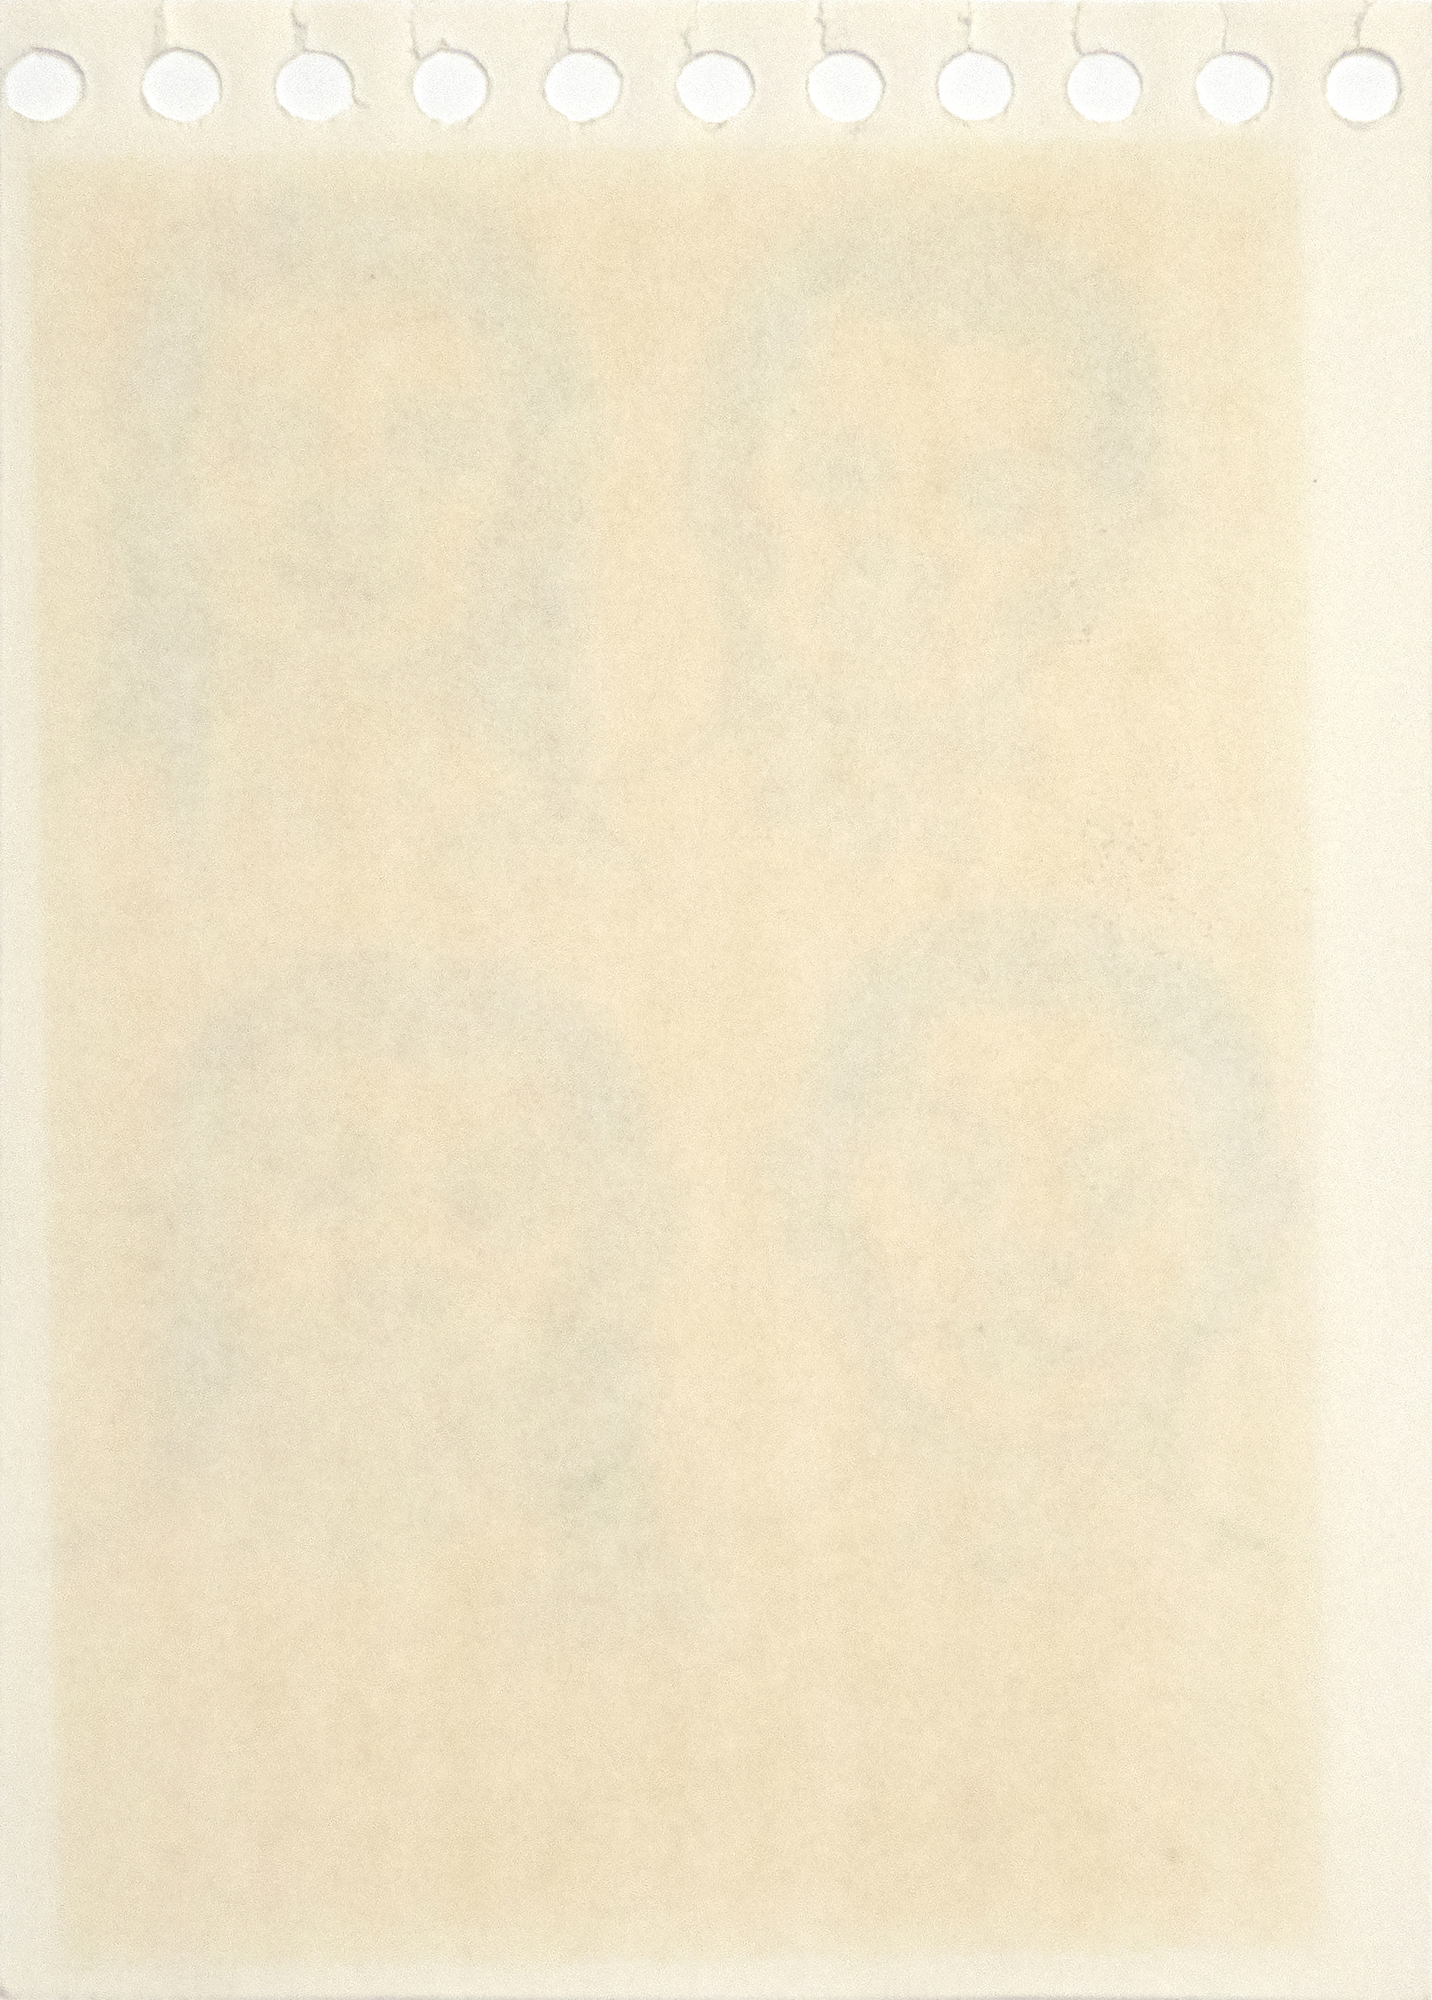 IRVING NORMAN - Untitled (Four Heads) - graphite on paper - 5 x 3 1/2 in.